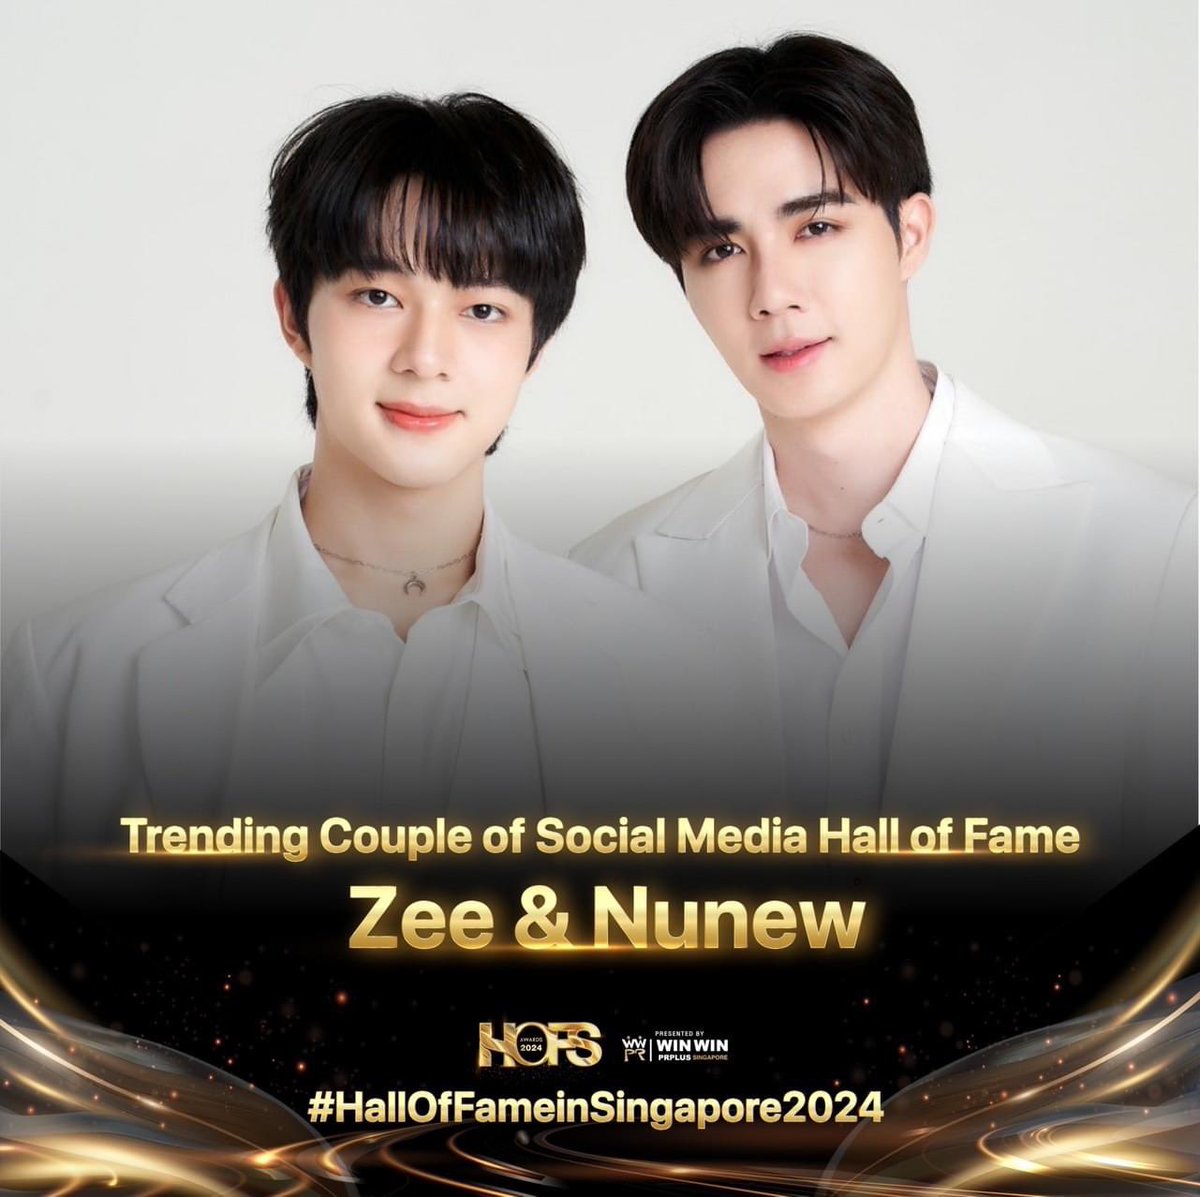 Congratulations #ZeeNuNew for being awarded the Trending Couple of Social Media Hall of Fame Singapore for 2024!🥳🥳 It's really a huge honor for them to be granted this award together, proud of them🥳🥳